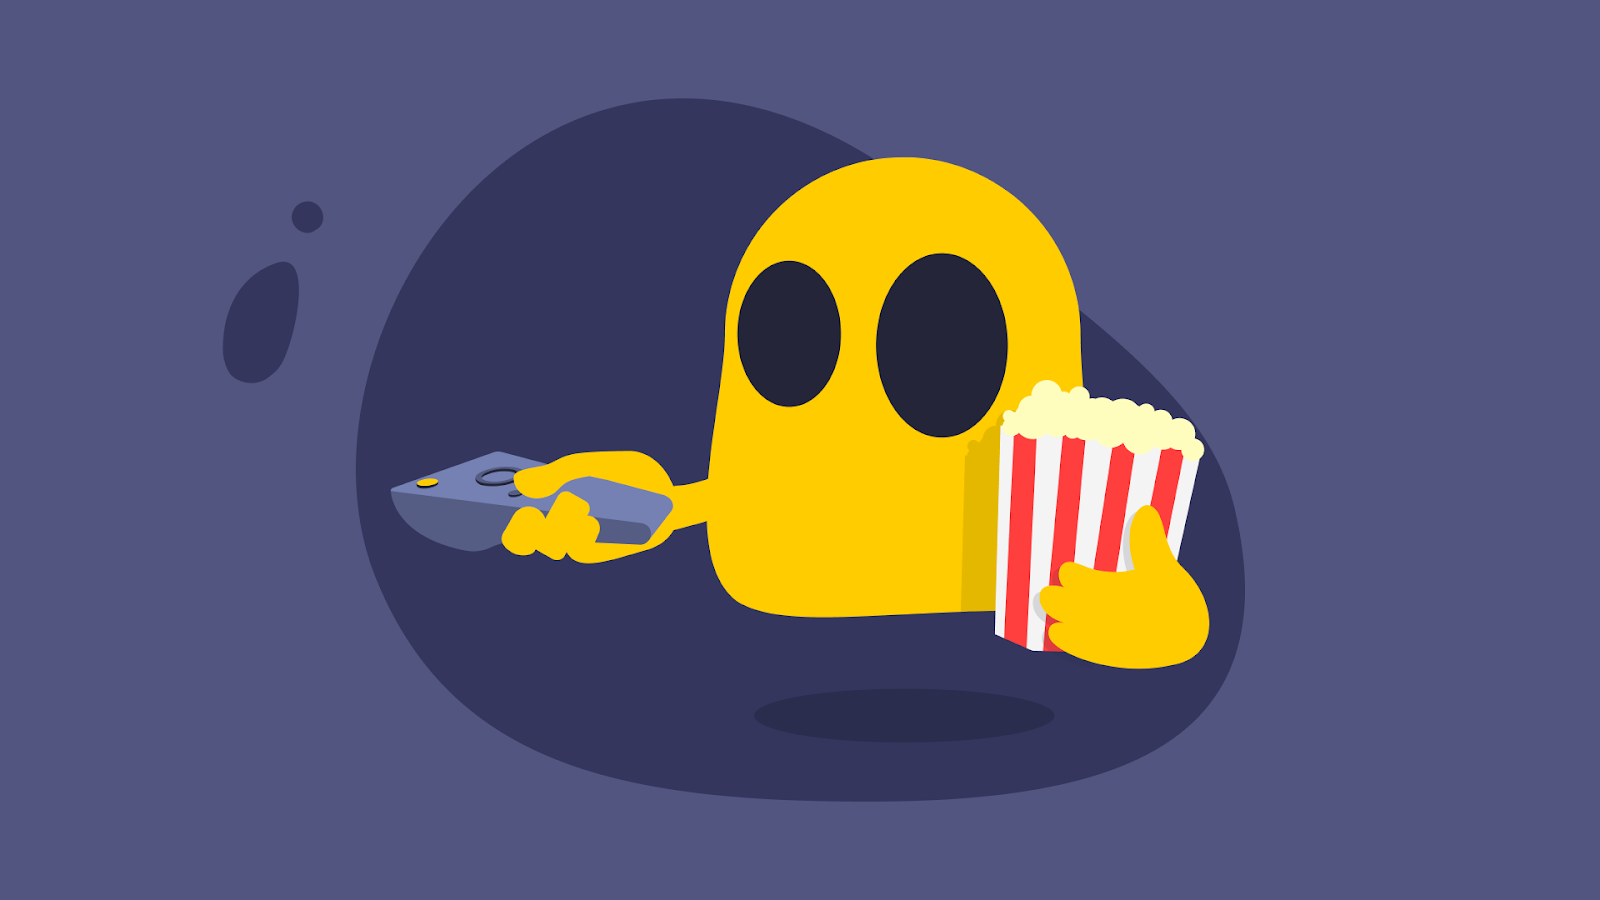 Ghostie holds a bucket of popcorn with his left hand, while he presses the remote control with his right hand.